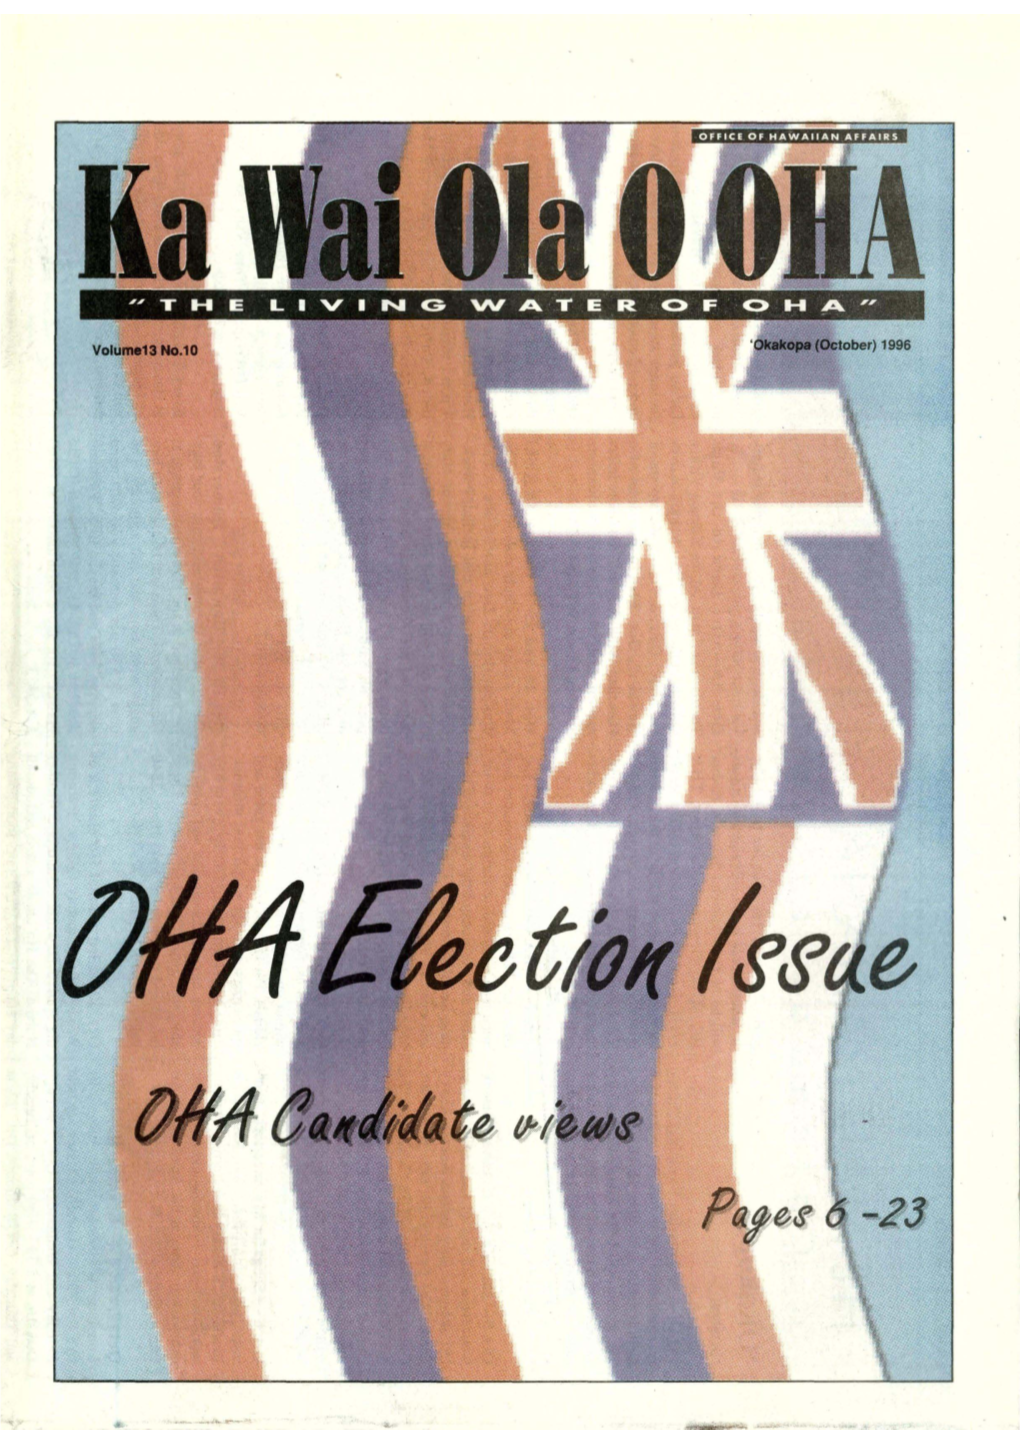 Ka Wai Ola OOHA; OHA and Its Kahuna Kuhilcuhi Pu'uone Today As He Did Since 1977, I Probably Could • Legibly Igned by the Author; and Housing Divi- Crack This Case